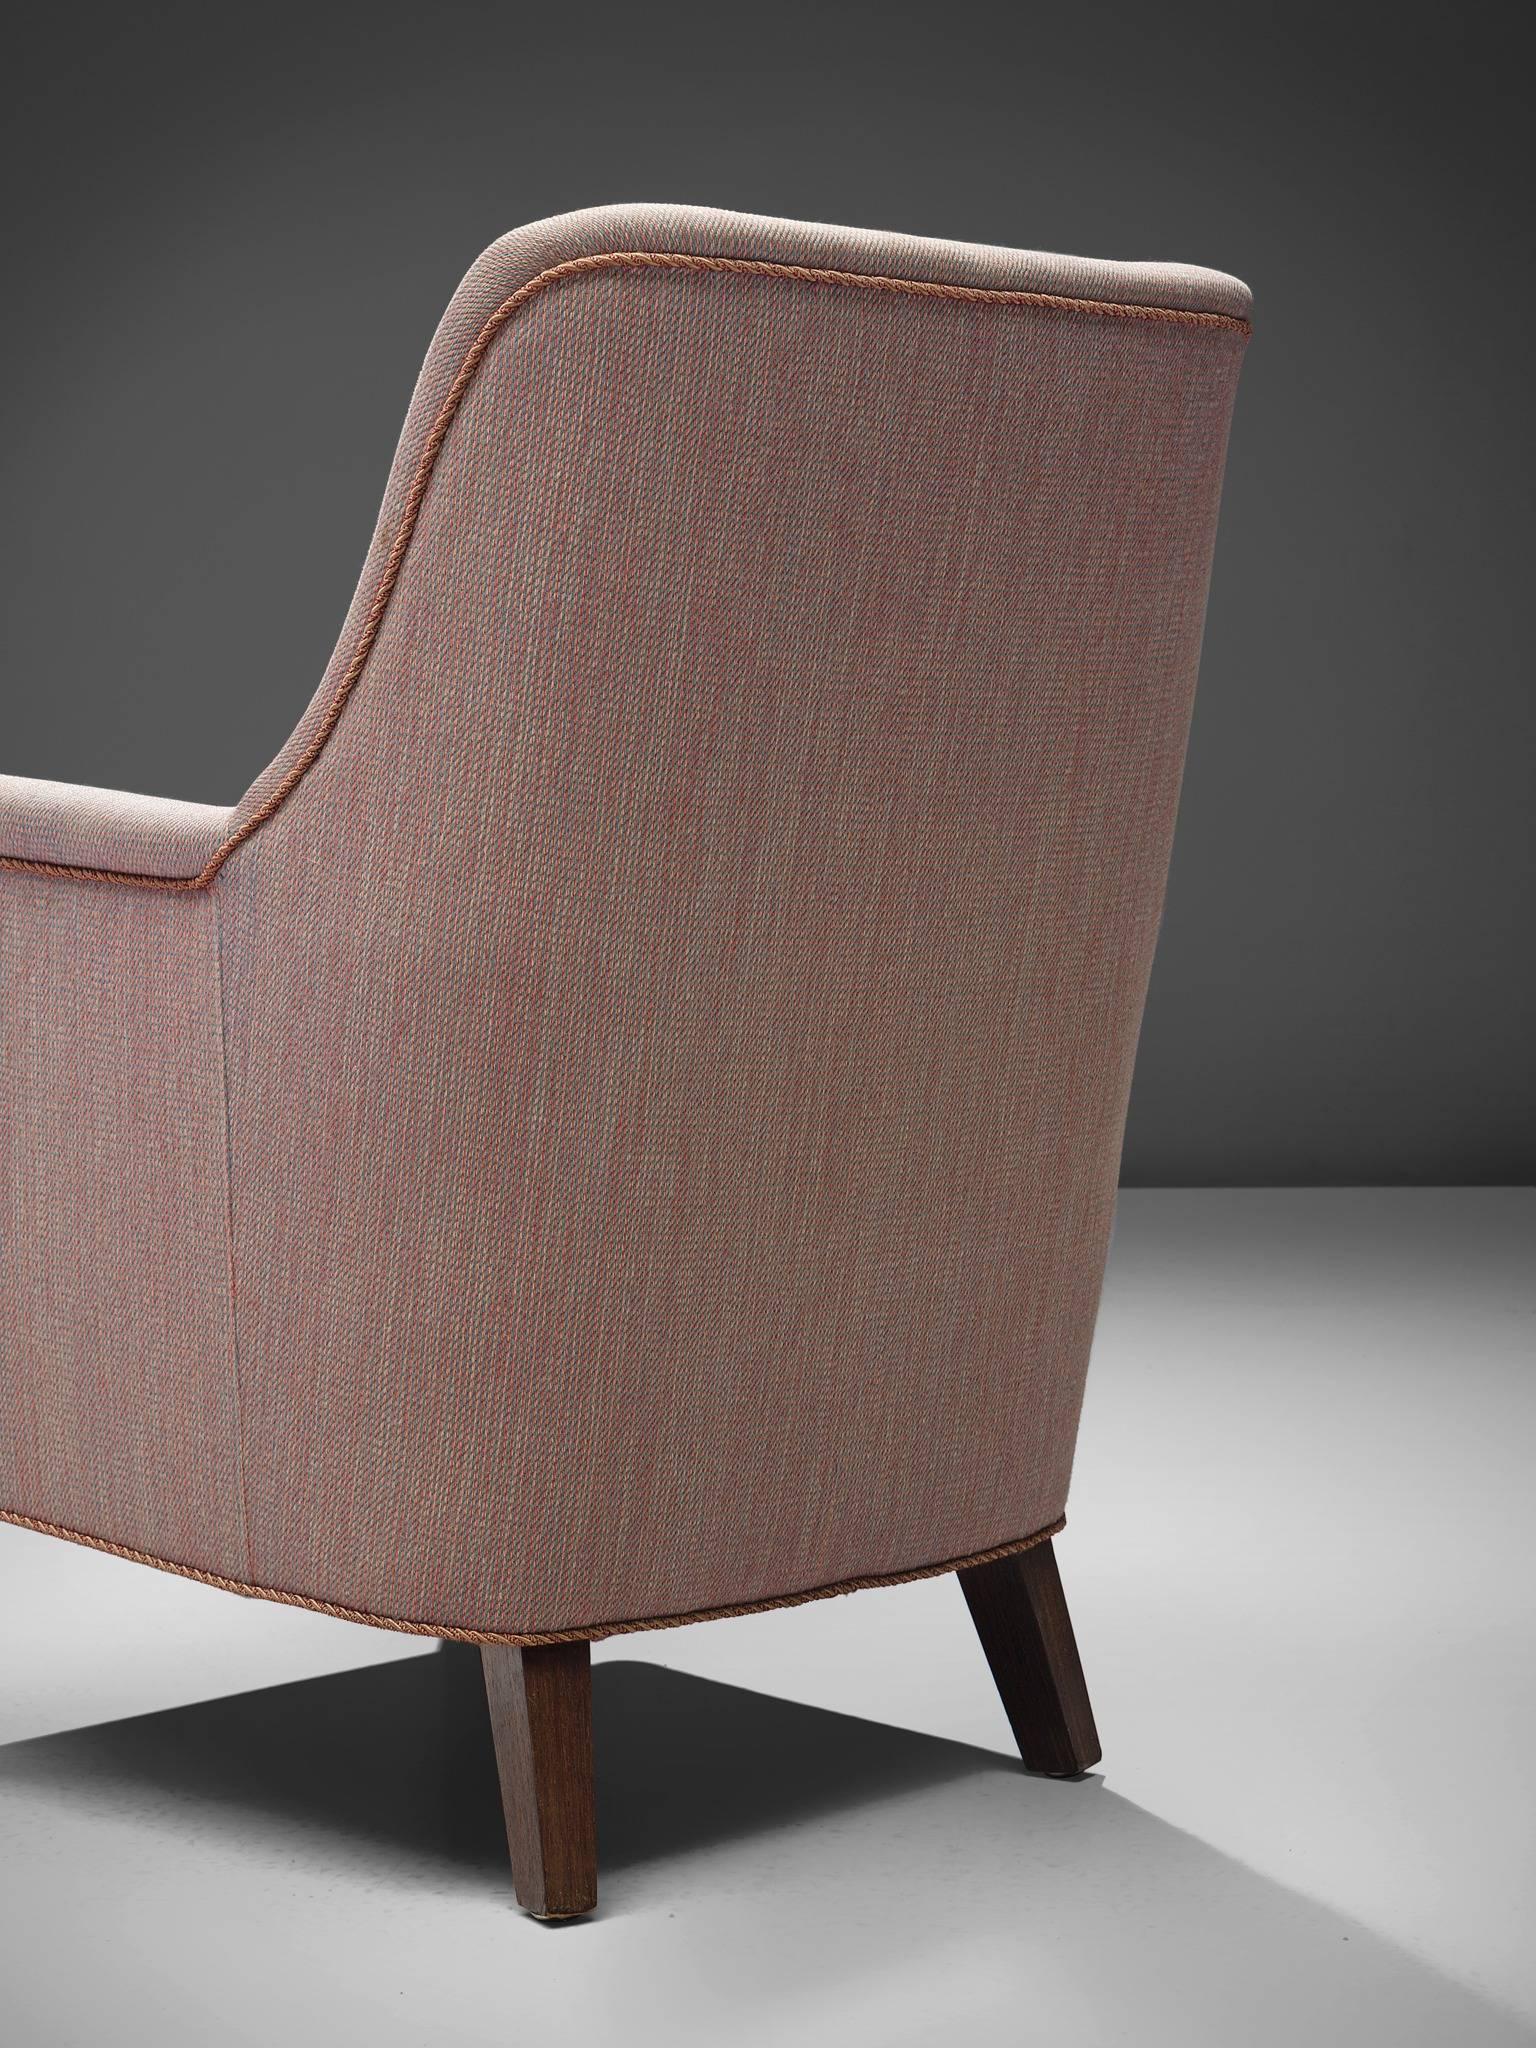 Mid-20th Century Danish Pink Armchair with Rosewood